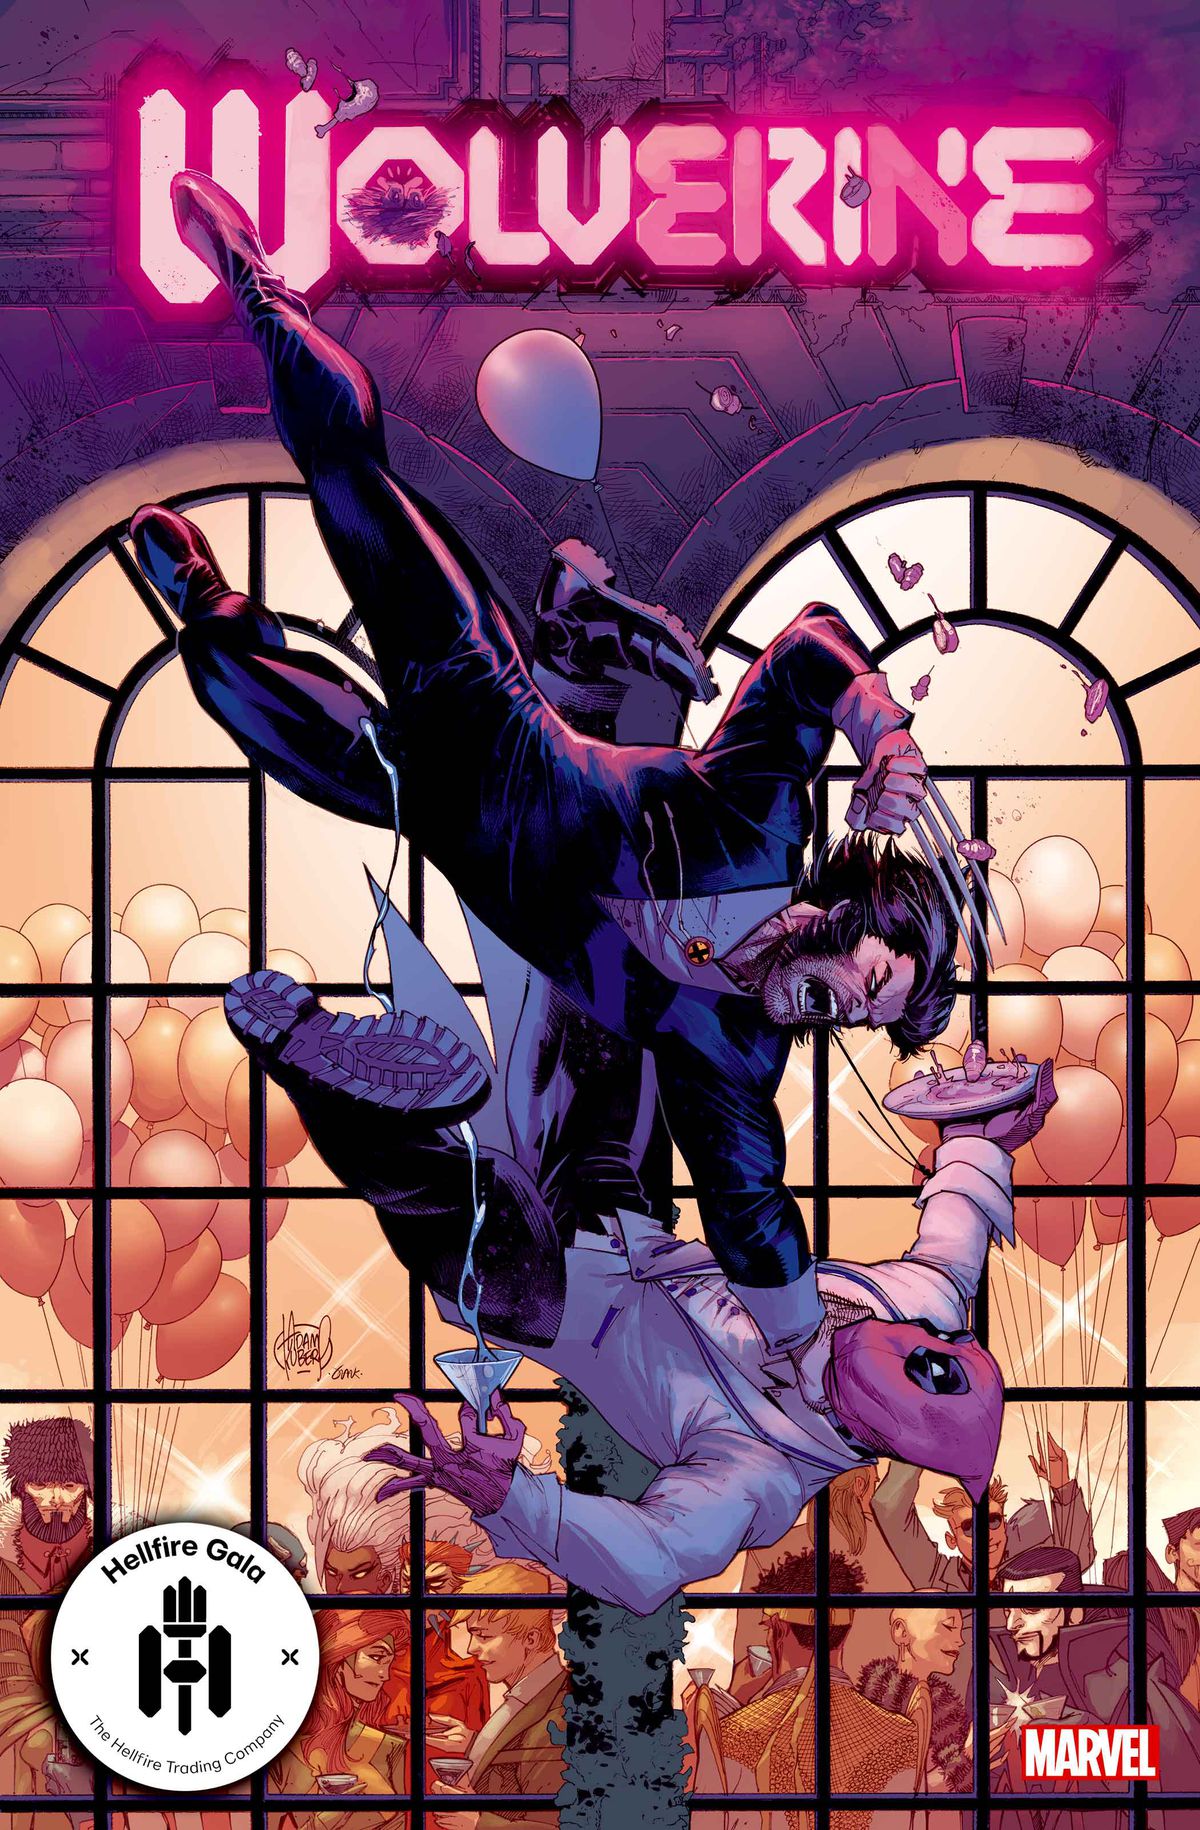 Wolverine attacks Deadpool outside of the Hellfire Gala on the cover of Wolverine #13, Marvel Comics (2021)